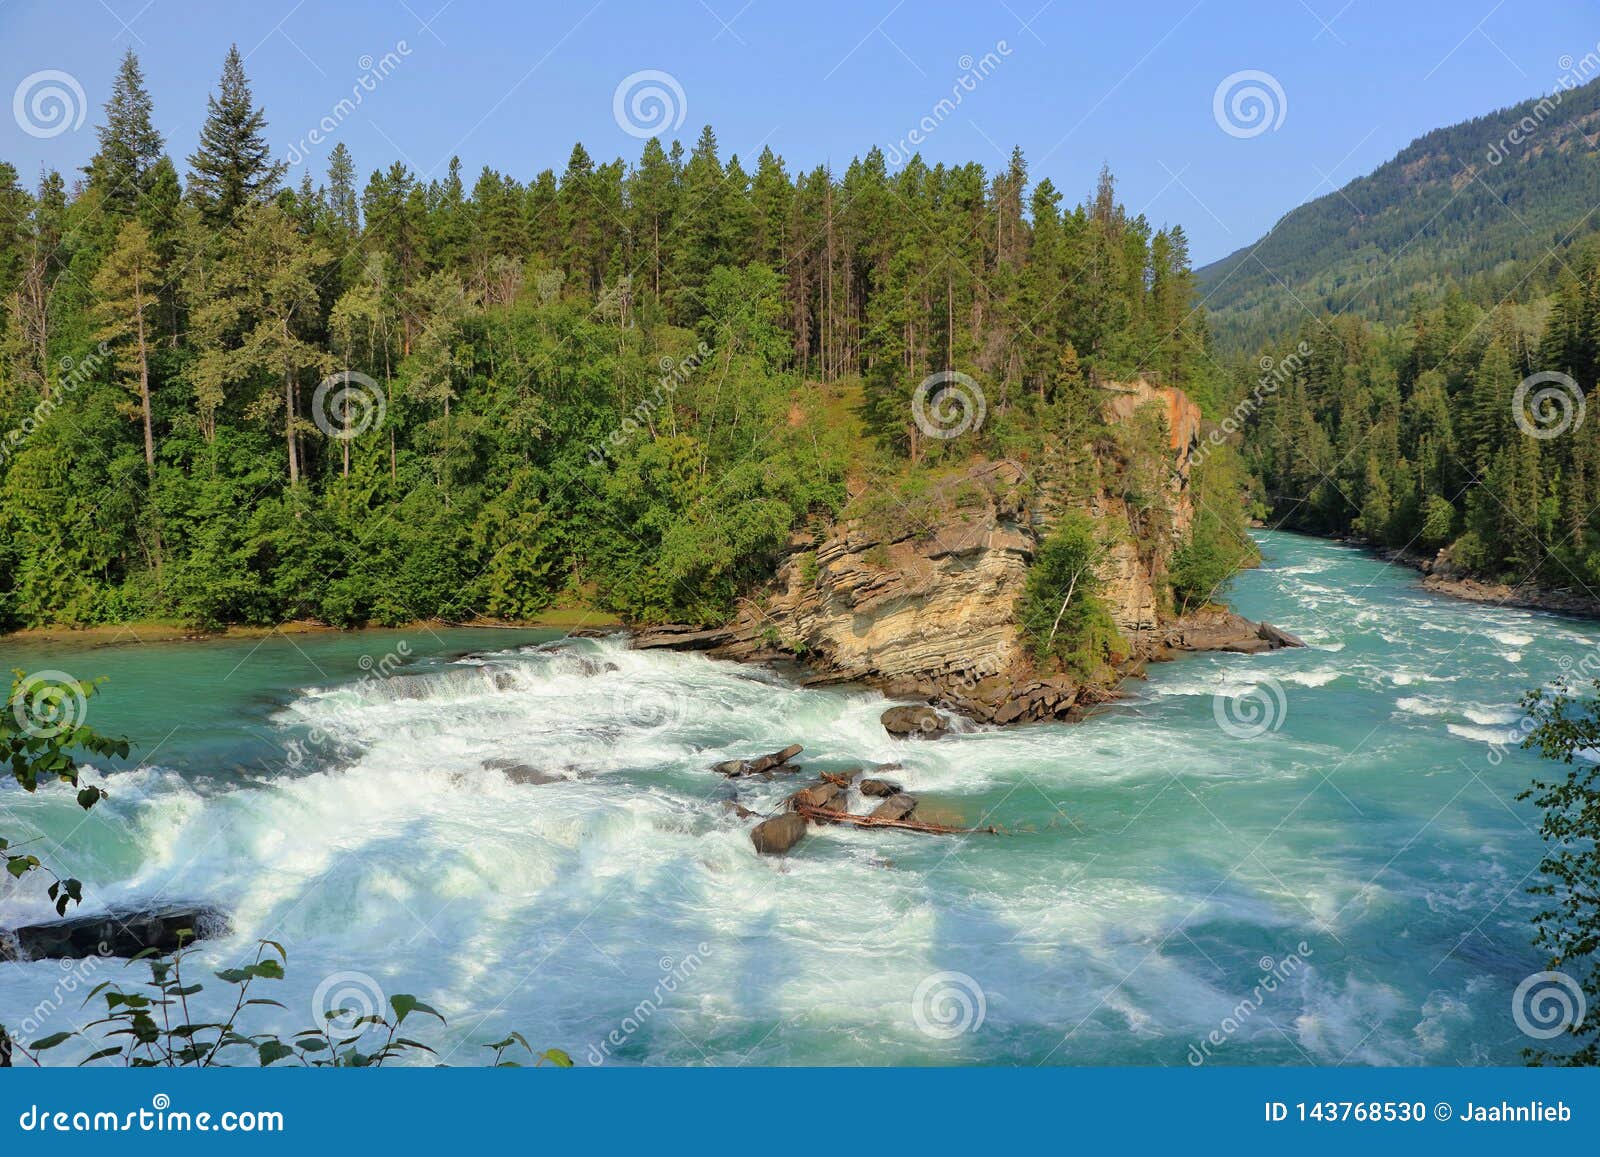 Fraser River Rushing Over Rearguard Falls In The Canadian Rocky